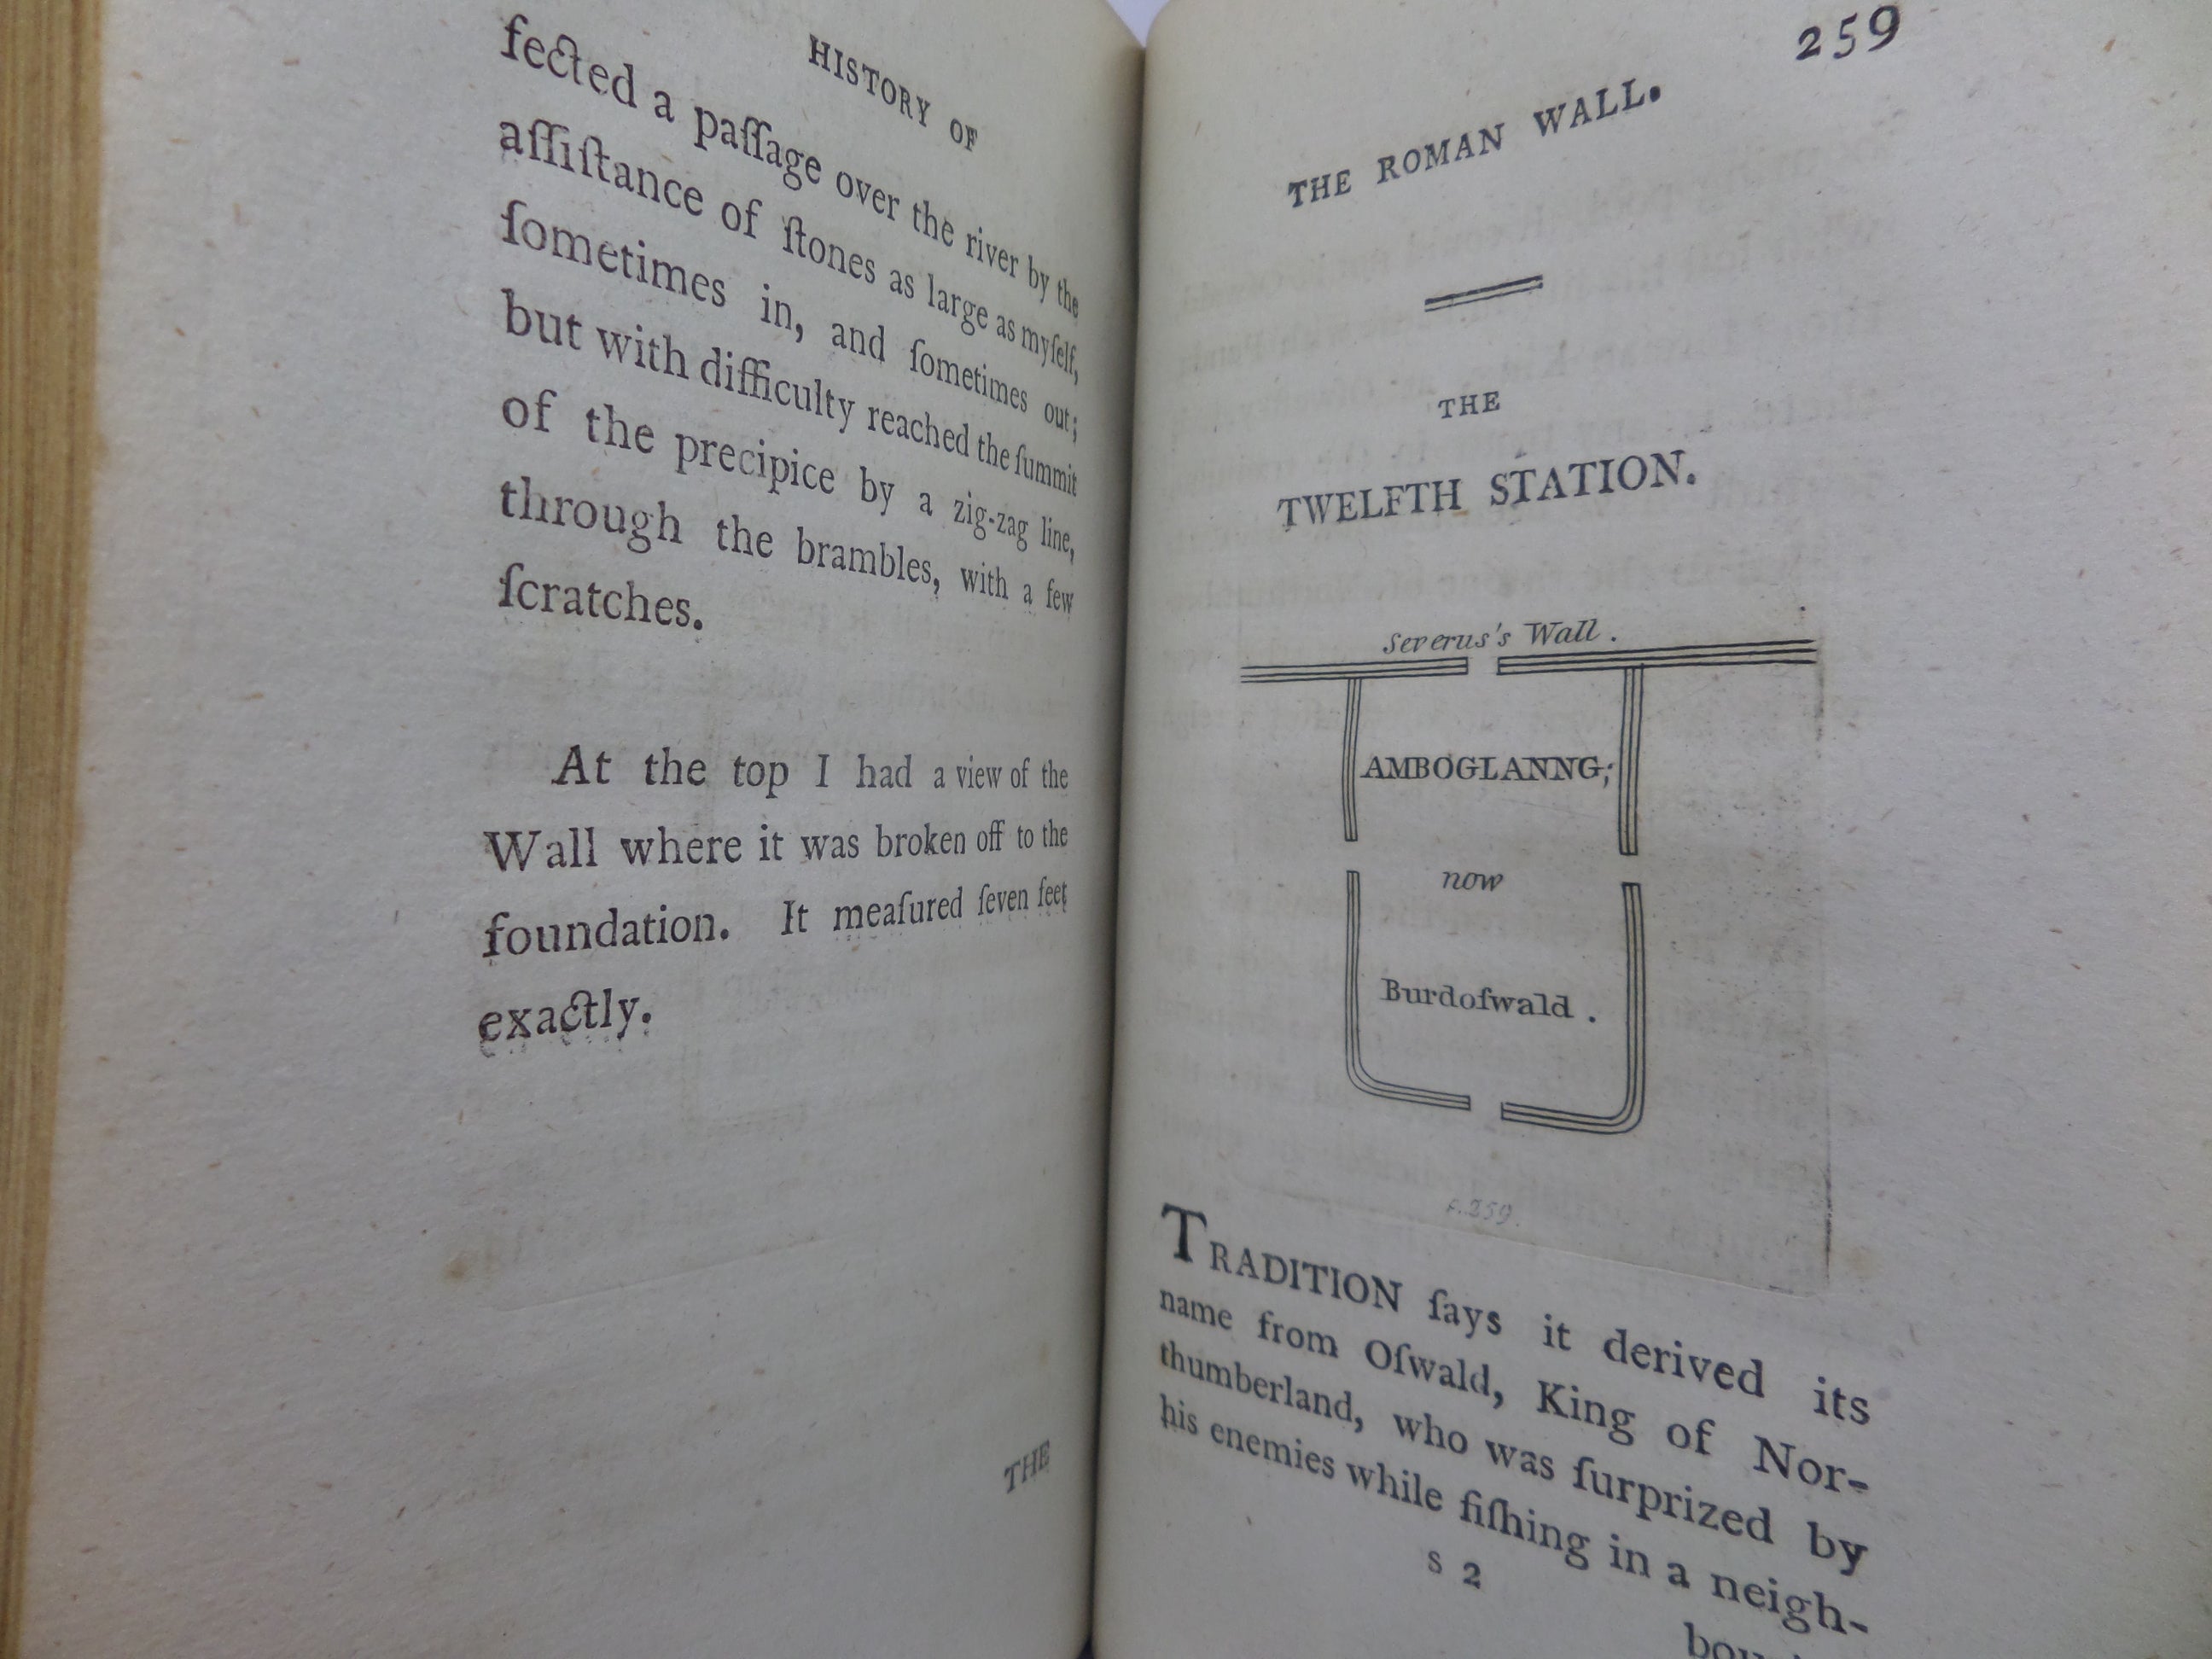 THE HISTORY OF THE ROMAN [HADRIAN'S] WALL BY WILLIAM HUTTON 1802 FIRST EDITION